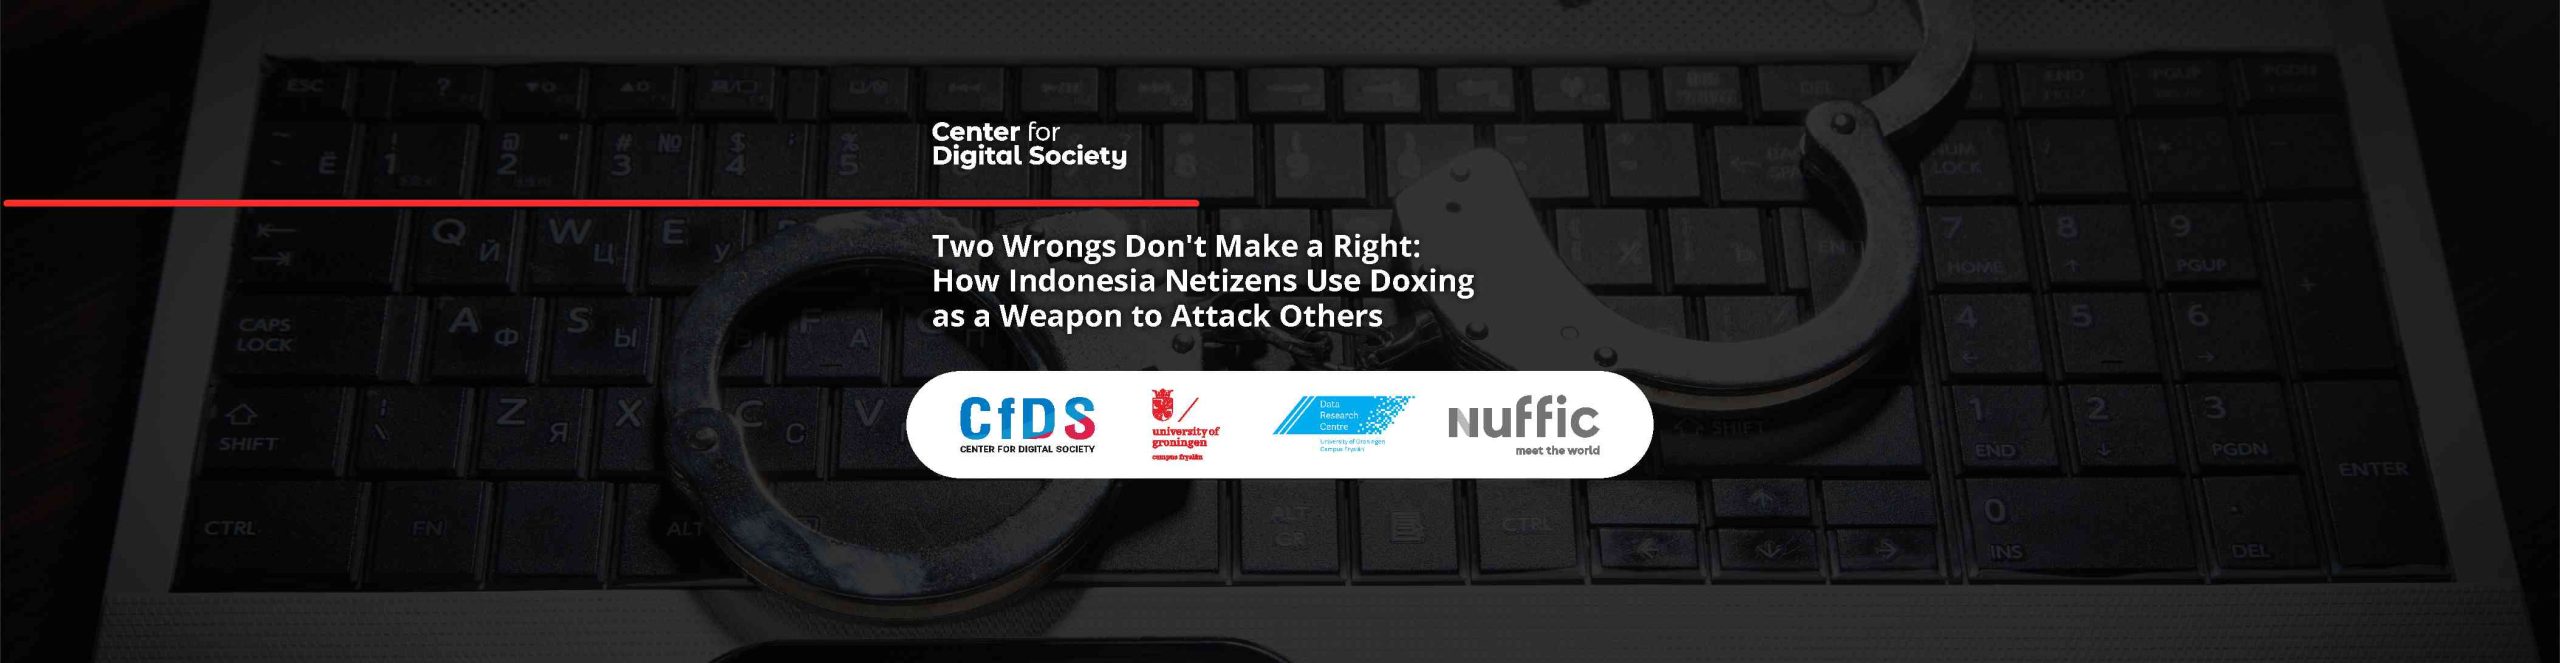 Two Wrongs Don’t Make a Right: How Indonesia Netizens Use Doxing as a Weapon to Attack Others